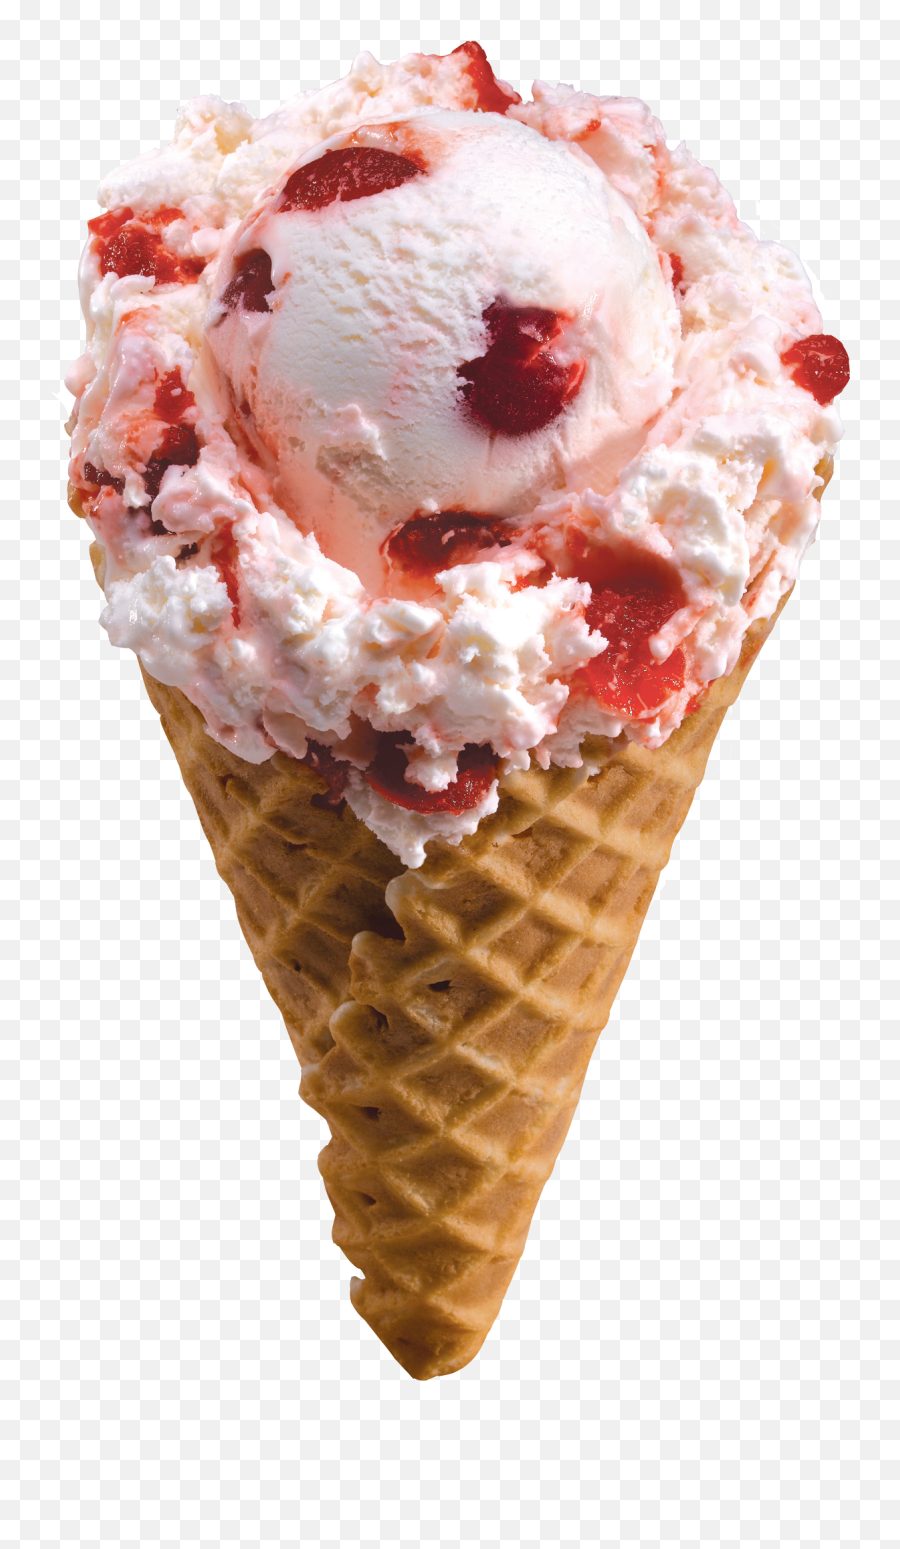 Download Free Png Ice Cream Image - Icecream Png,Ice Cream Png Transparent